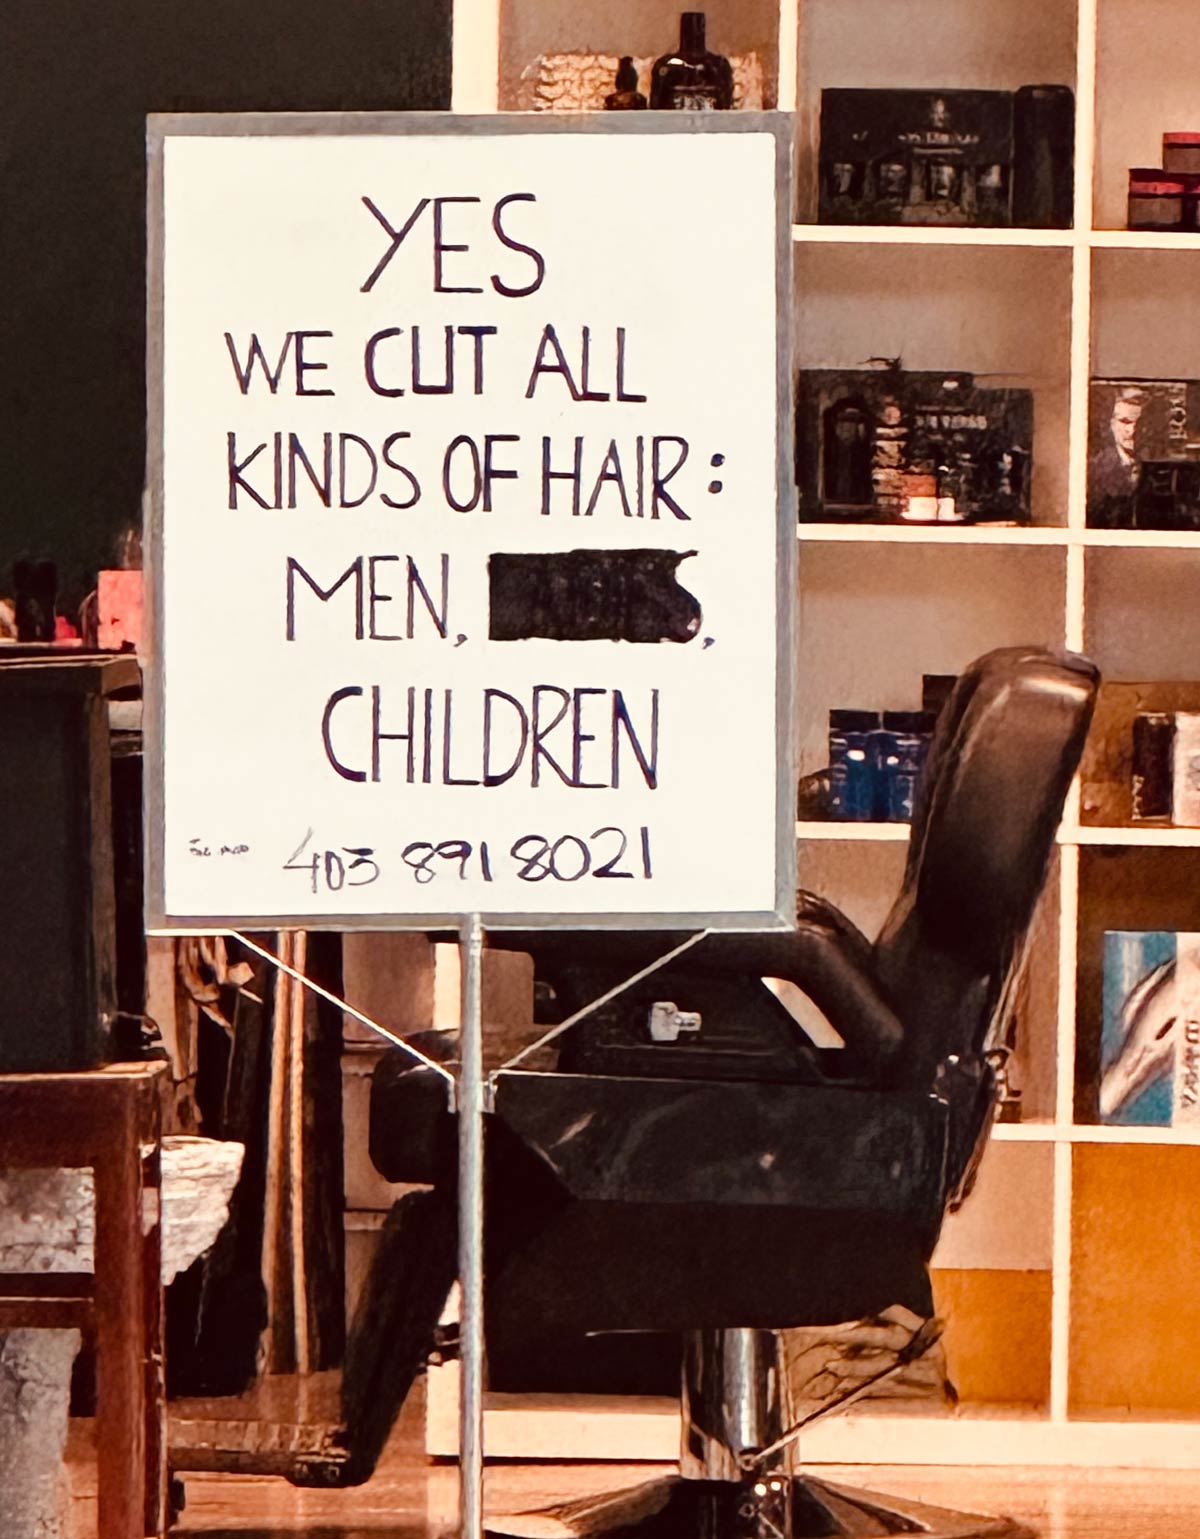 All kinds of hair...As long as you're a man or child